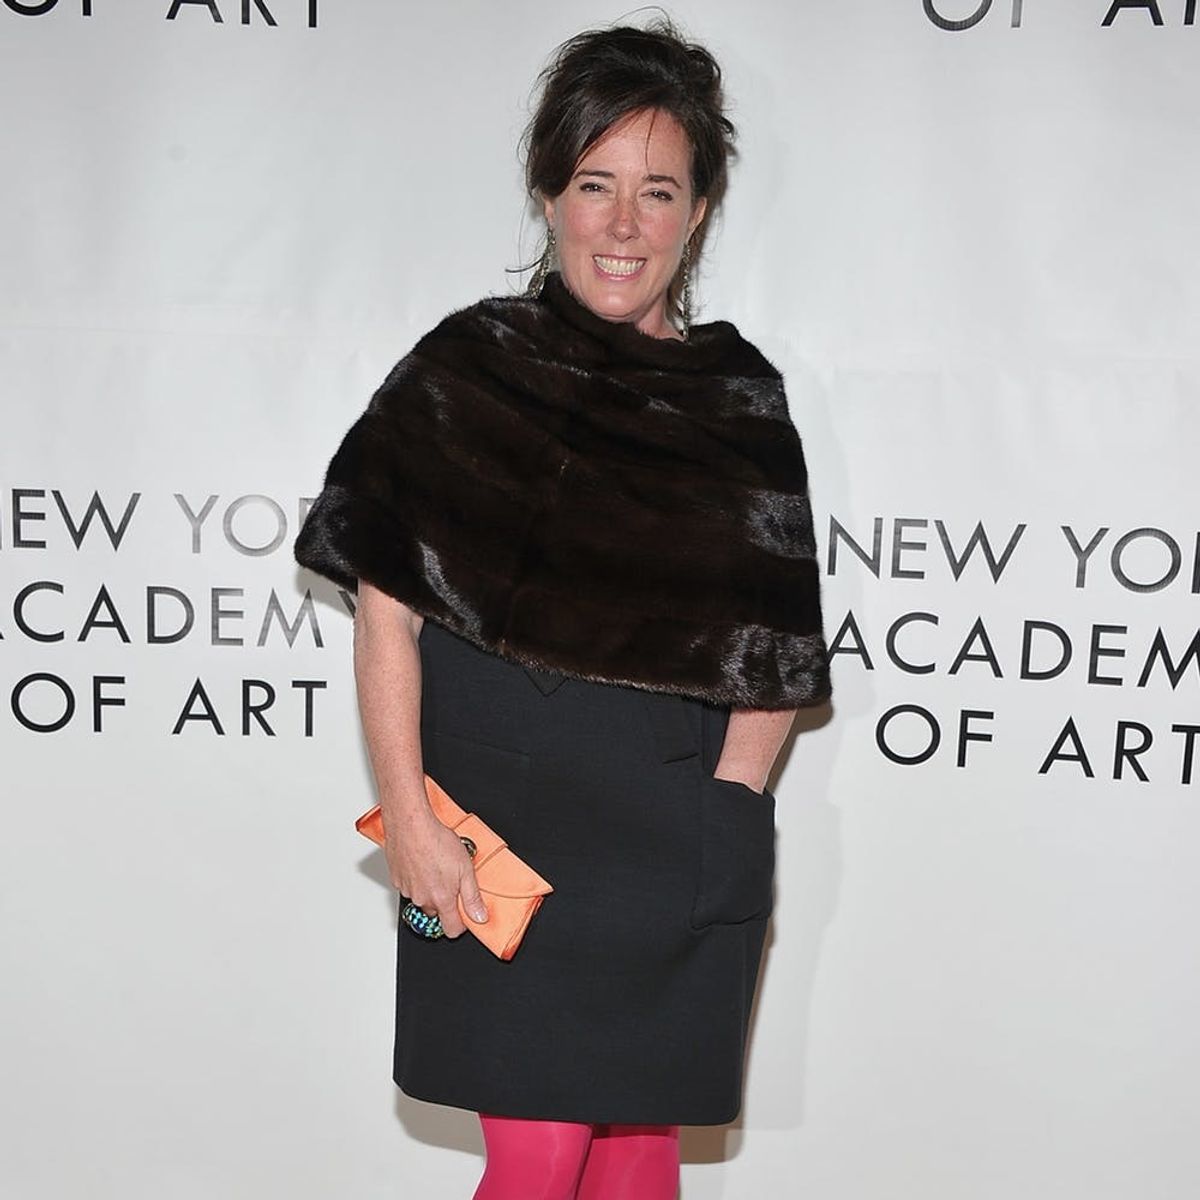 For Millennial Women Like Me, Kate Spade Embodied the Freedom to Stand Out